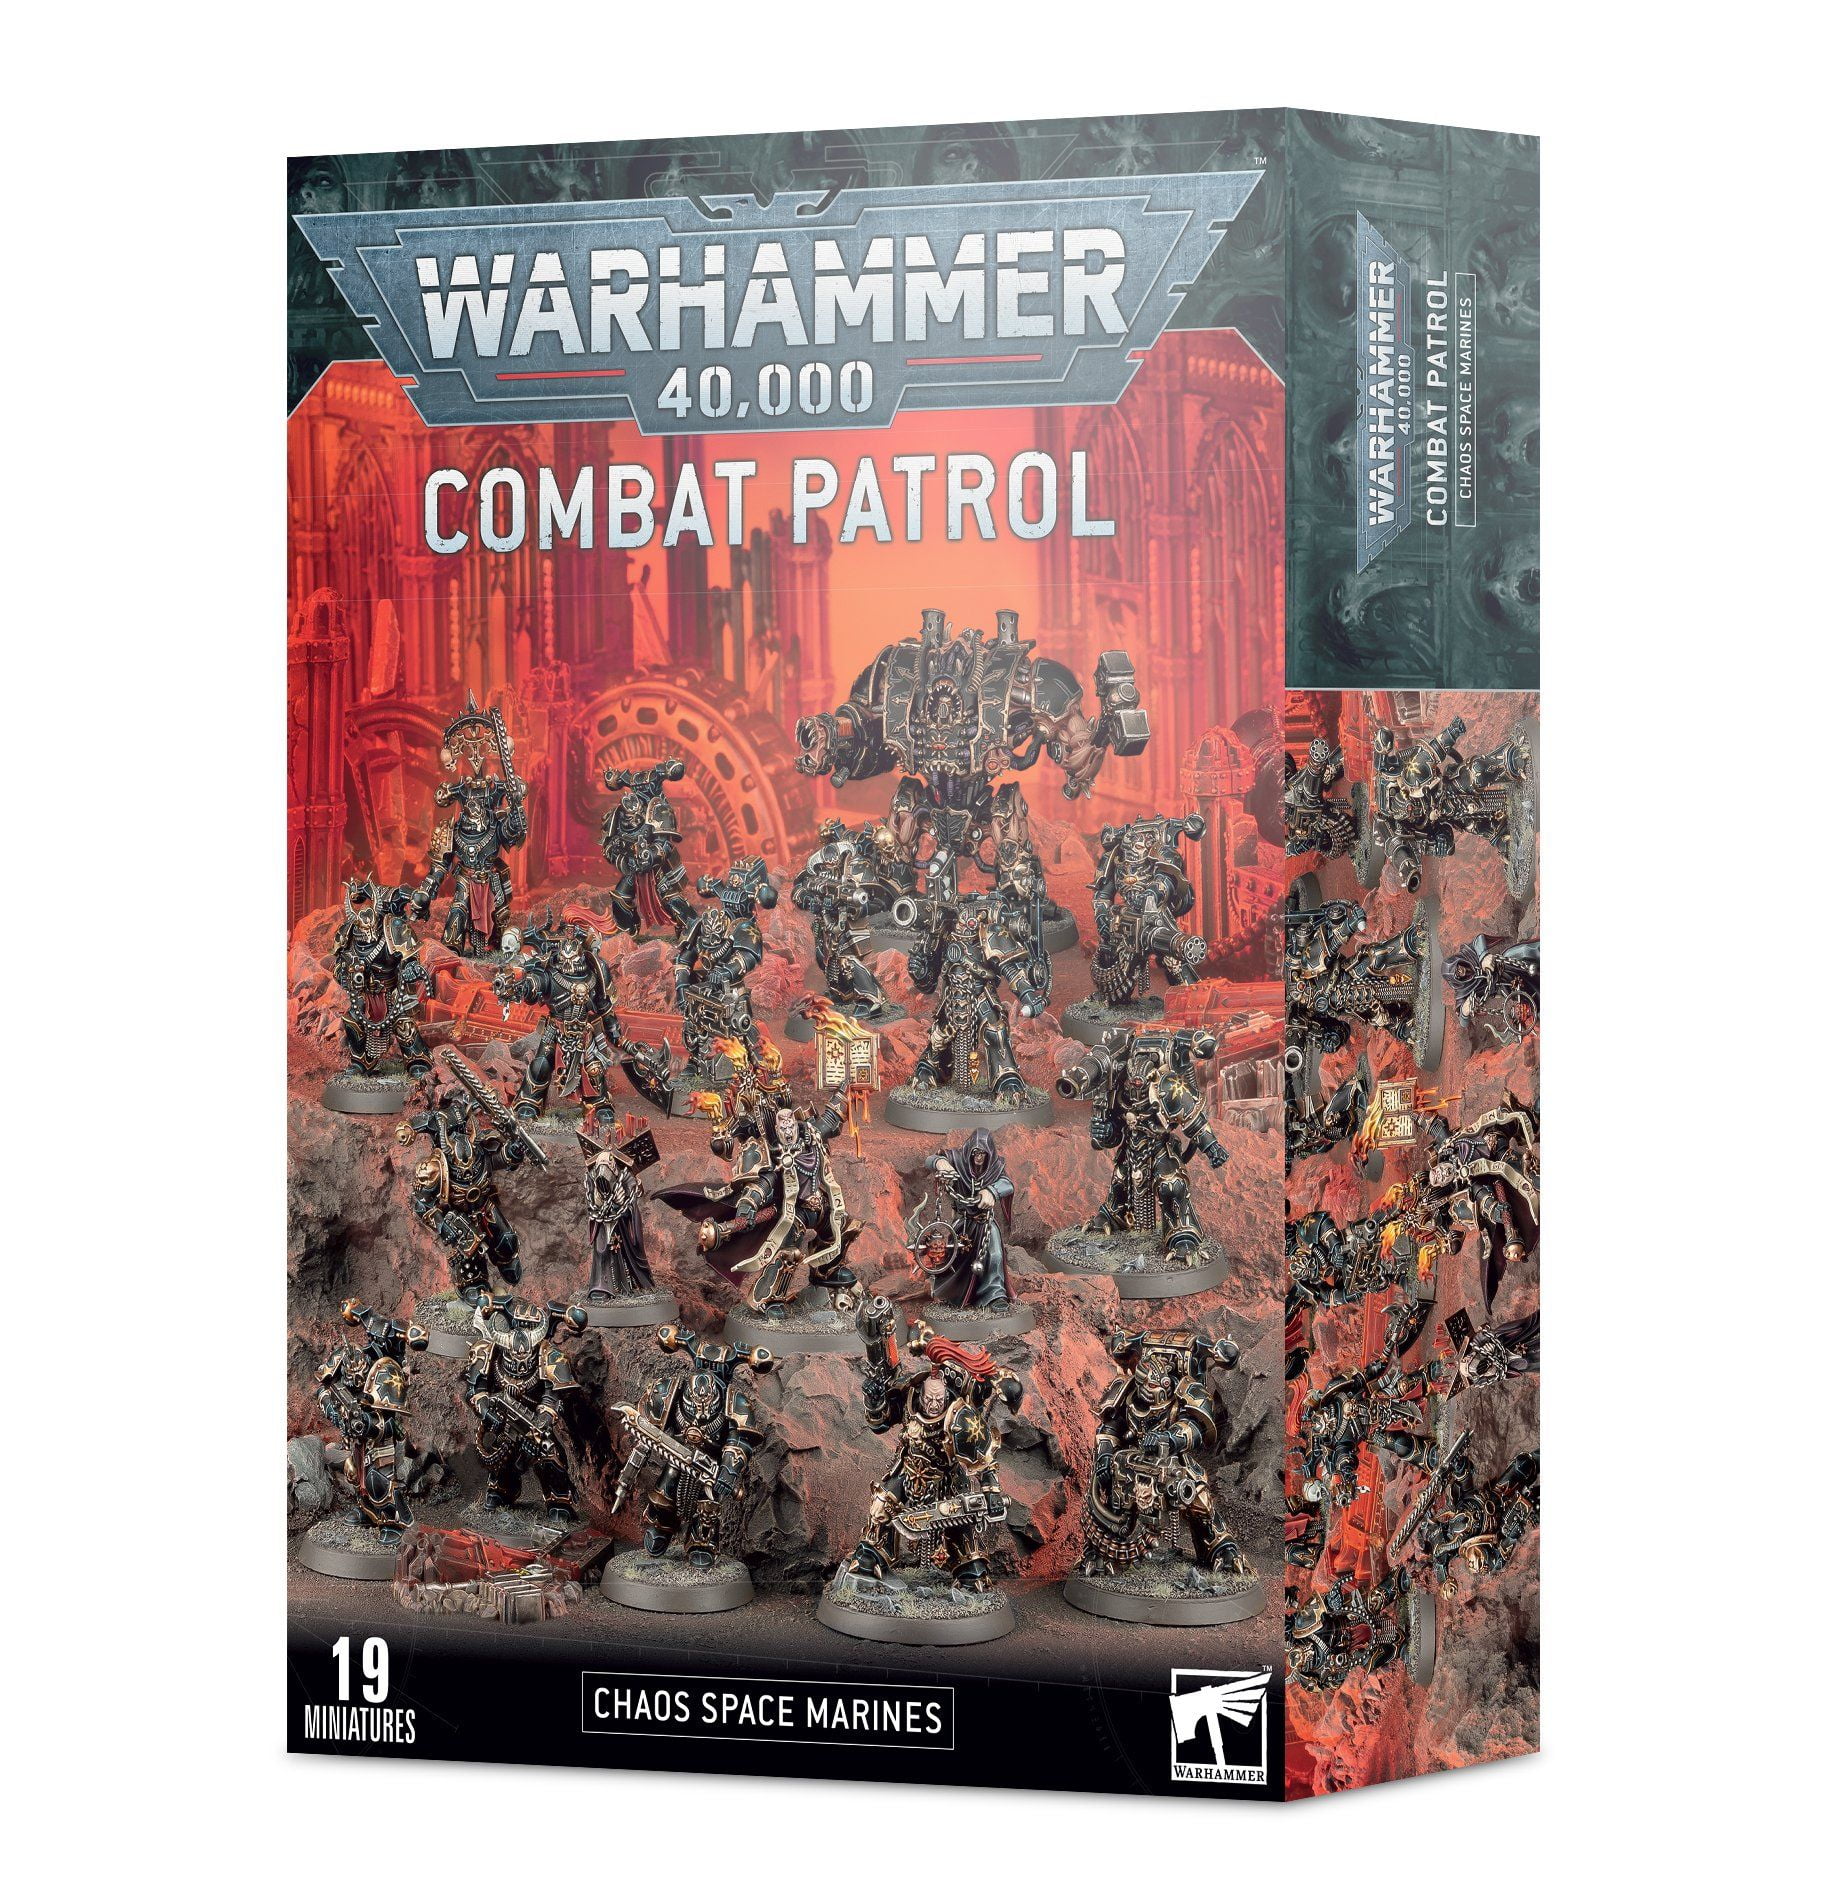 Combat Patrol: Chaos Space Marines - 9th Edition